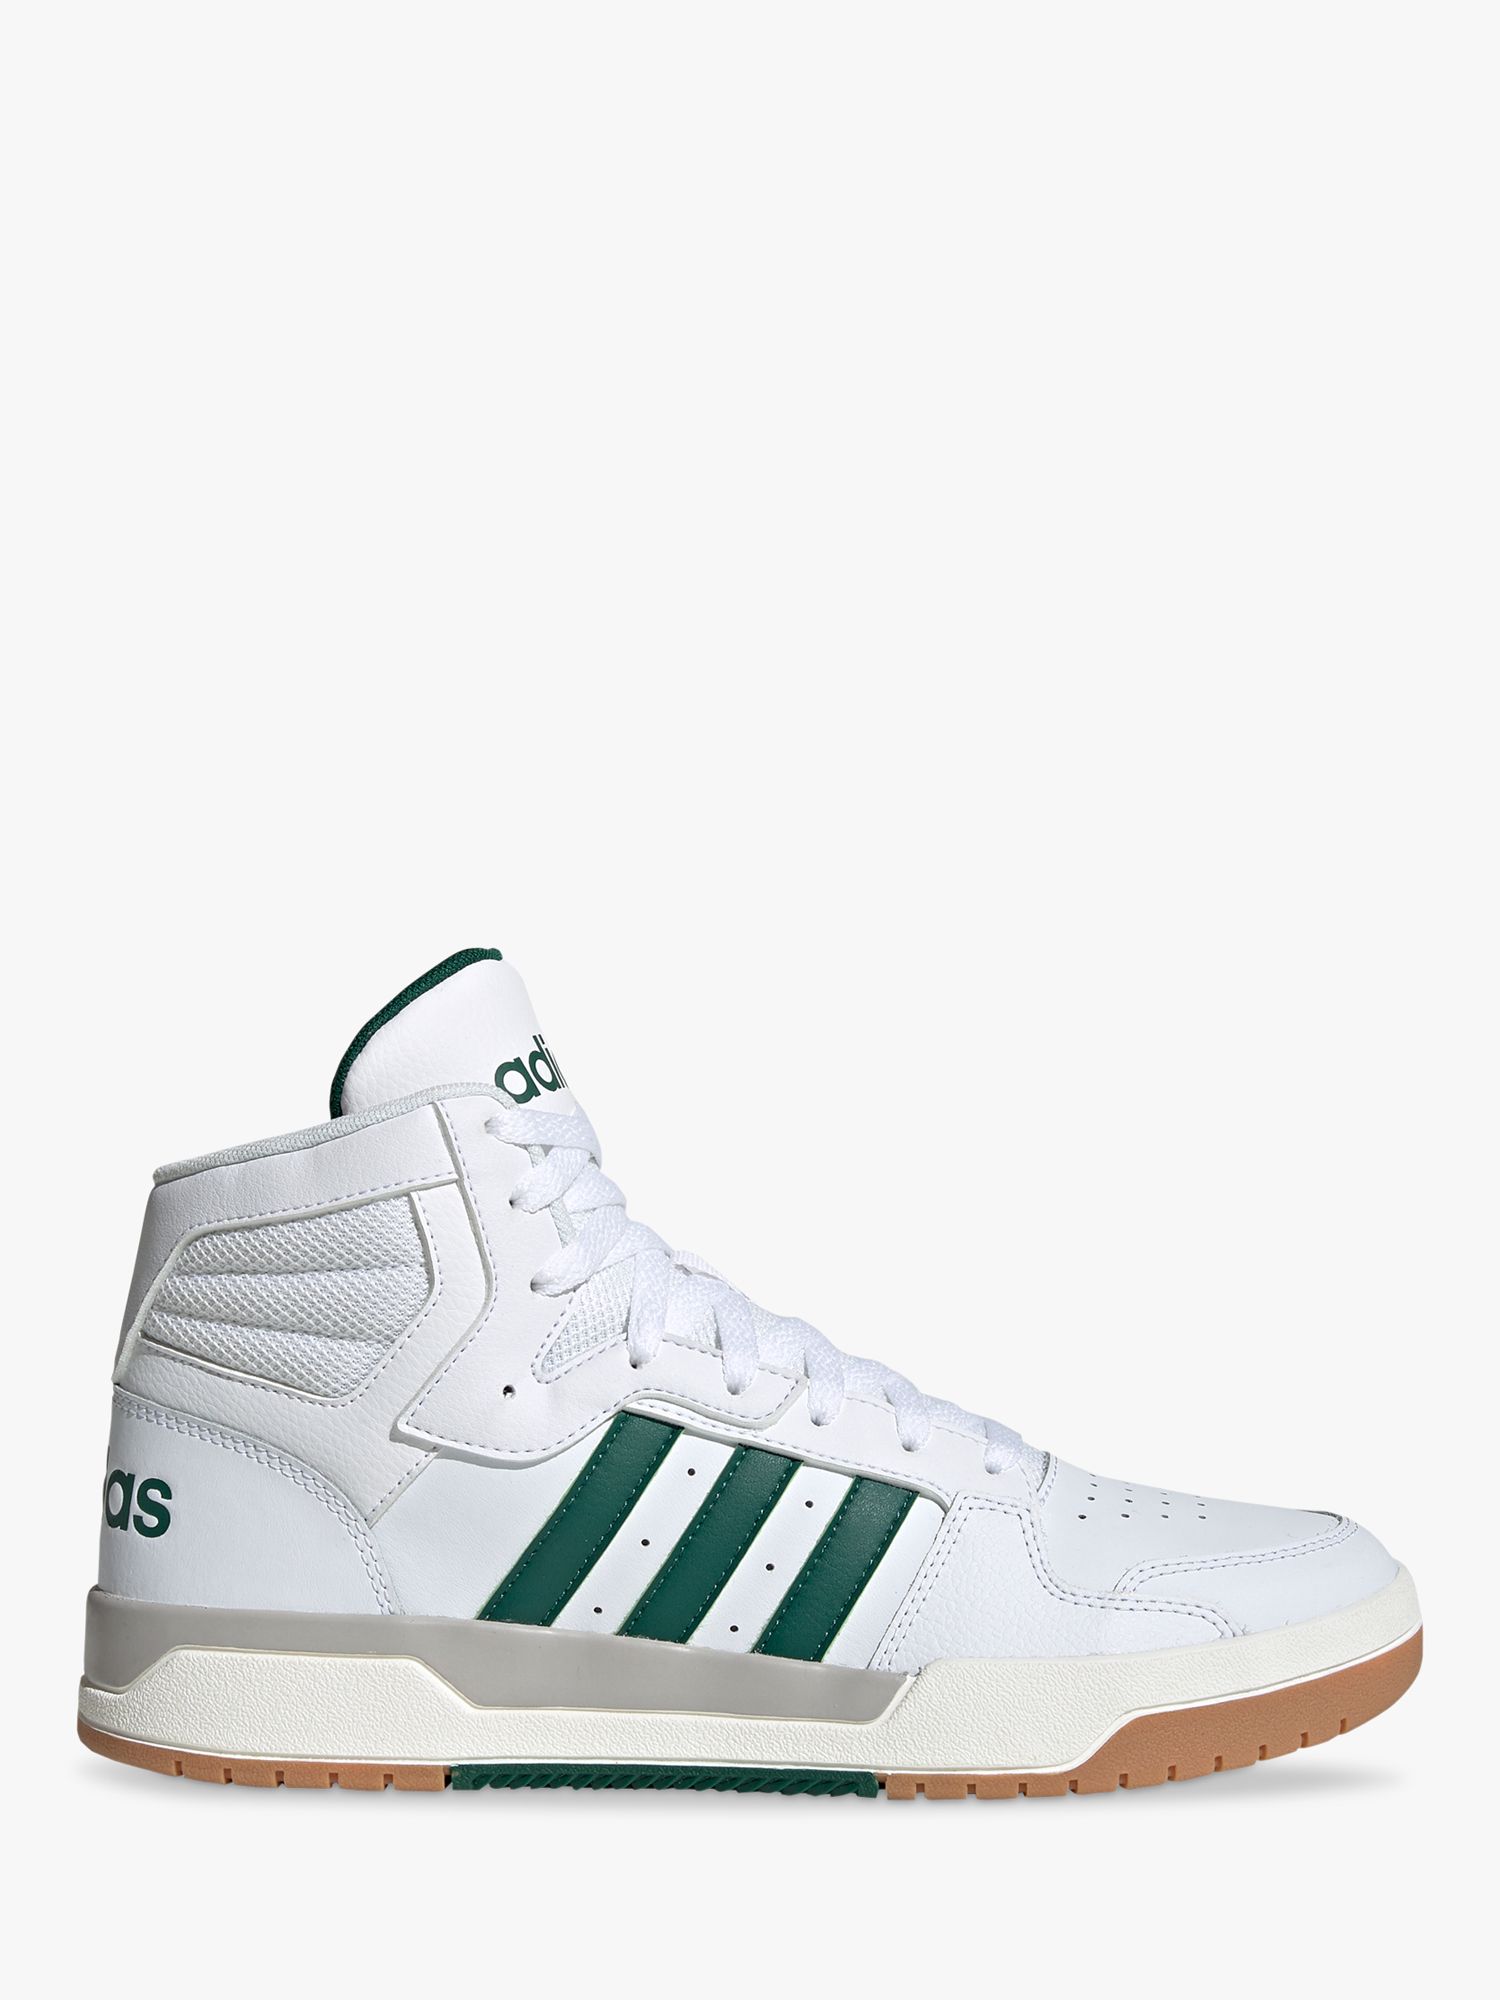 adidas entrap mid mens trainers